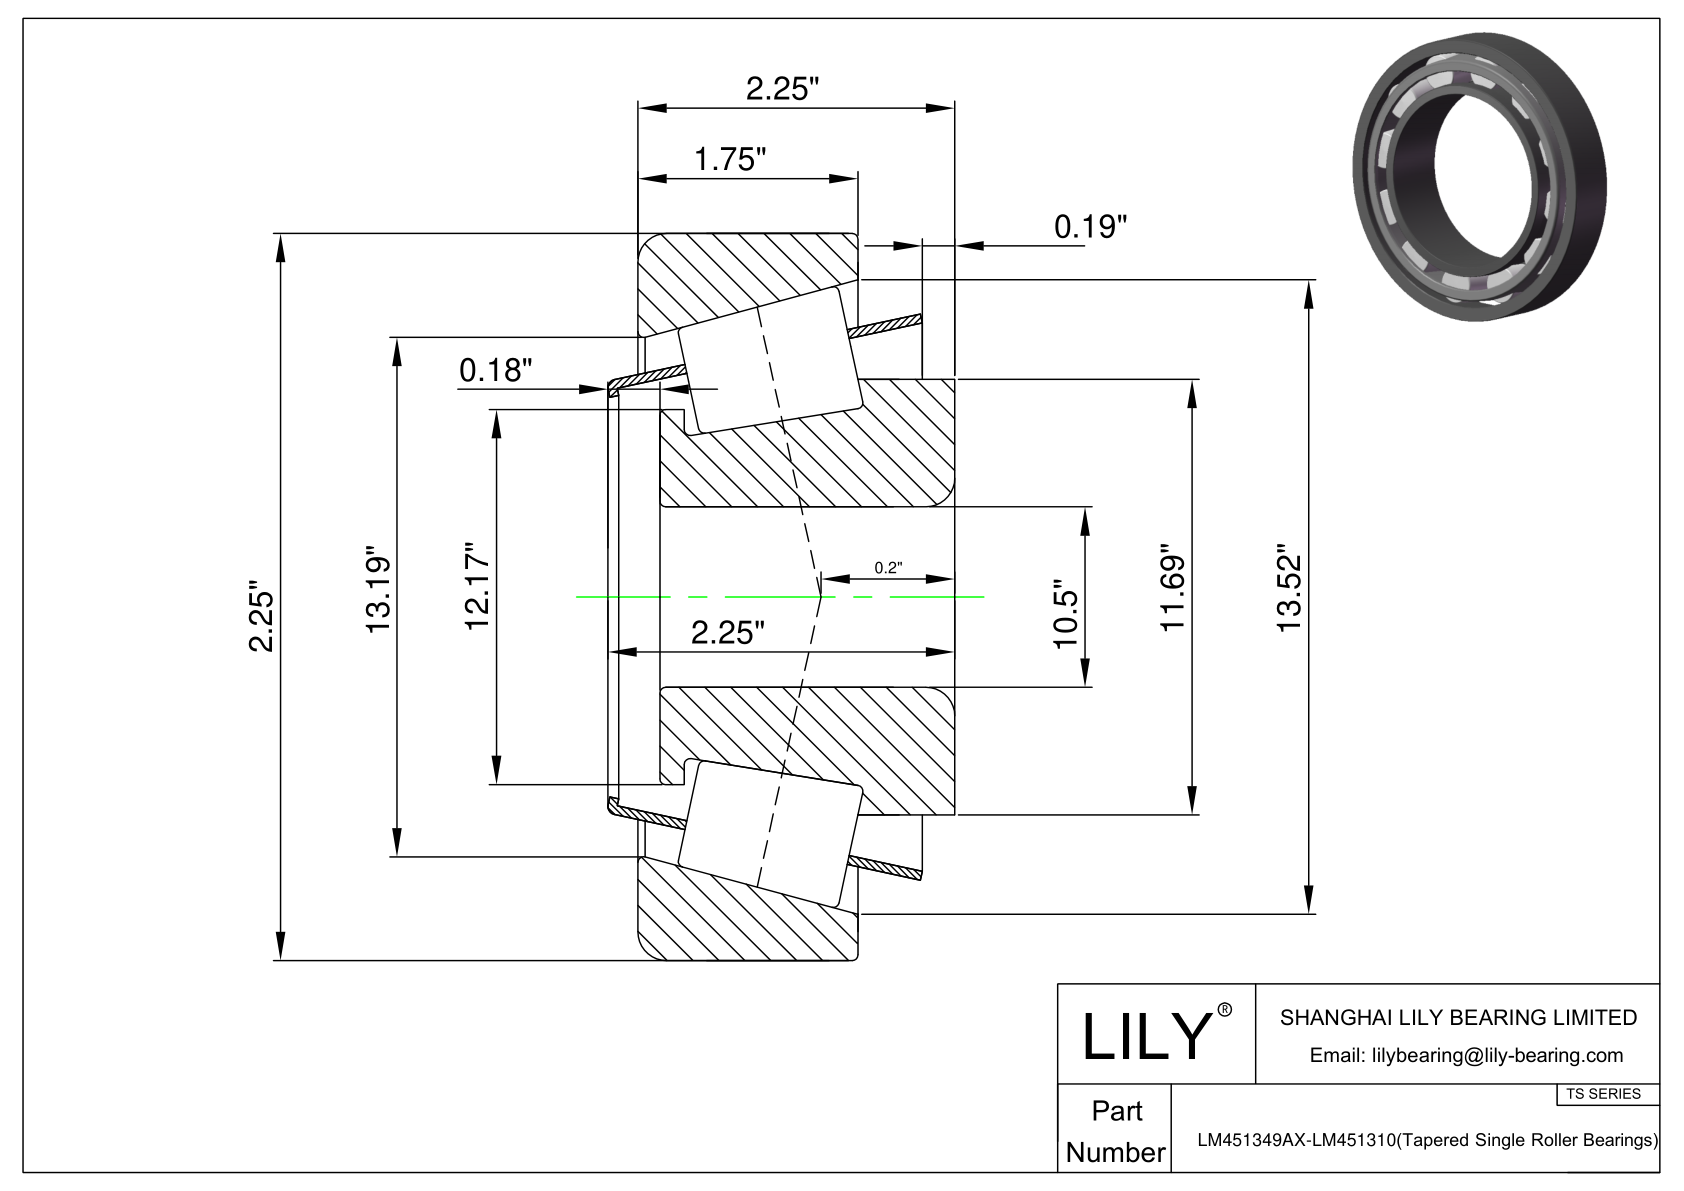 LM451349AX-LM451310 TS (Tapered Single Roller Bearings) (Imperial) cad drawing